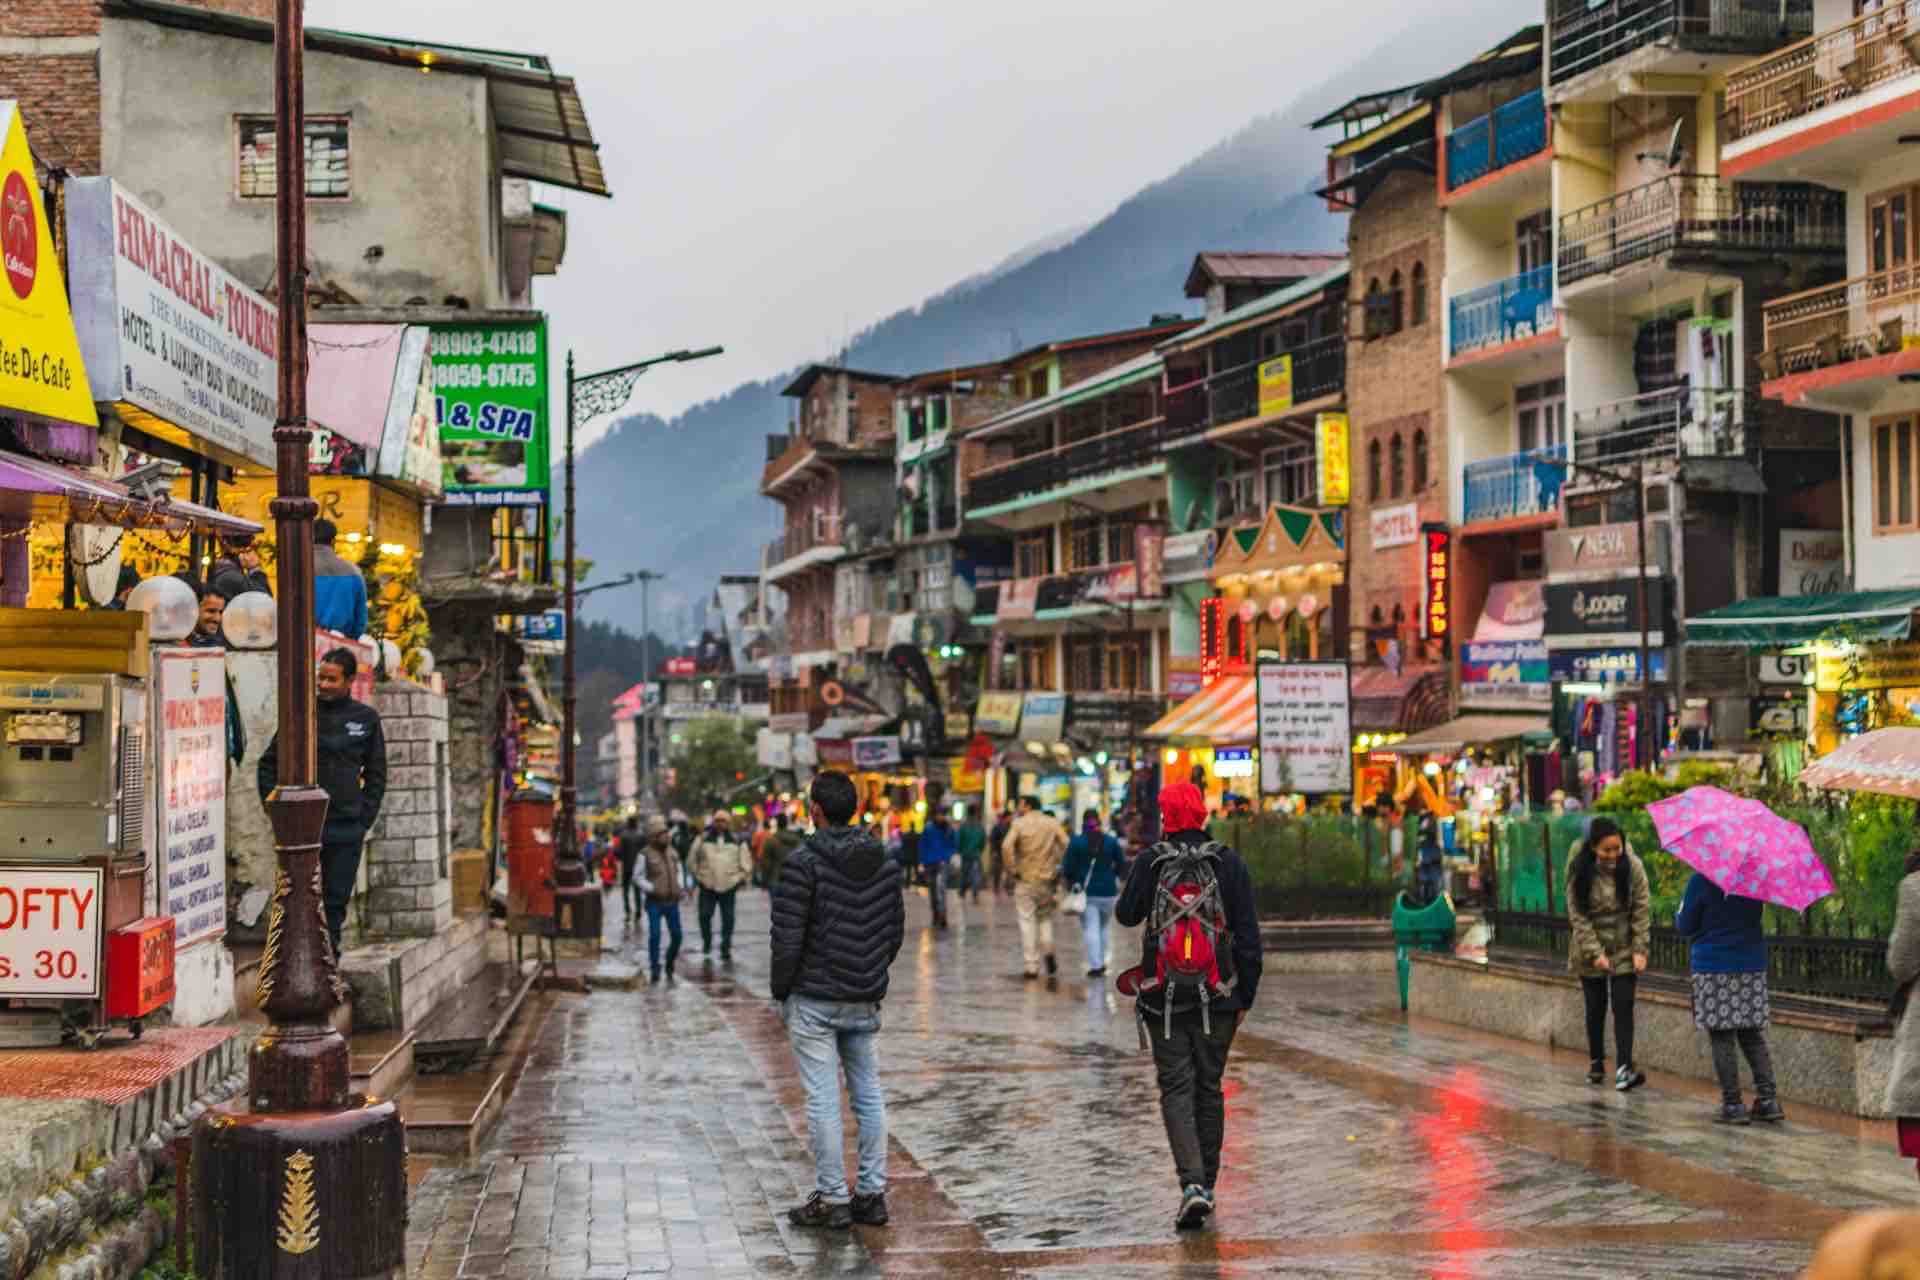 Mall Road, Manali that used to be full of crowds and hustle-bustle during peak travel season